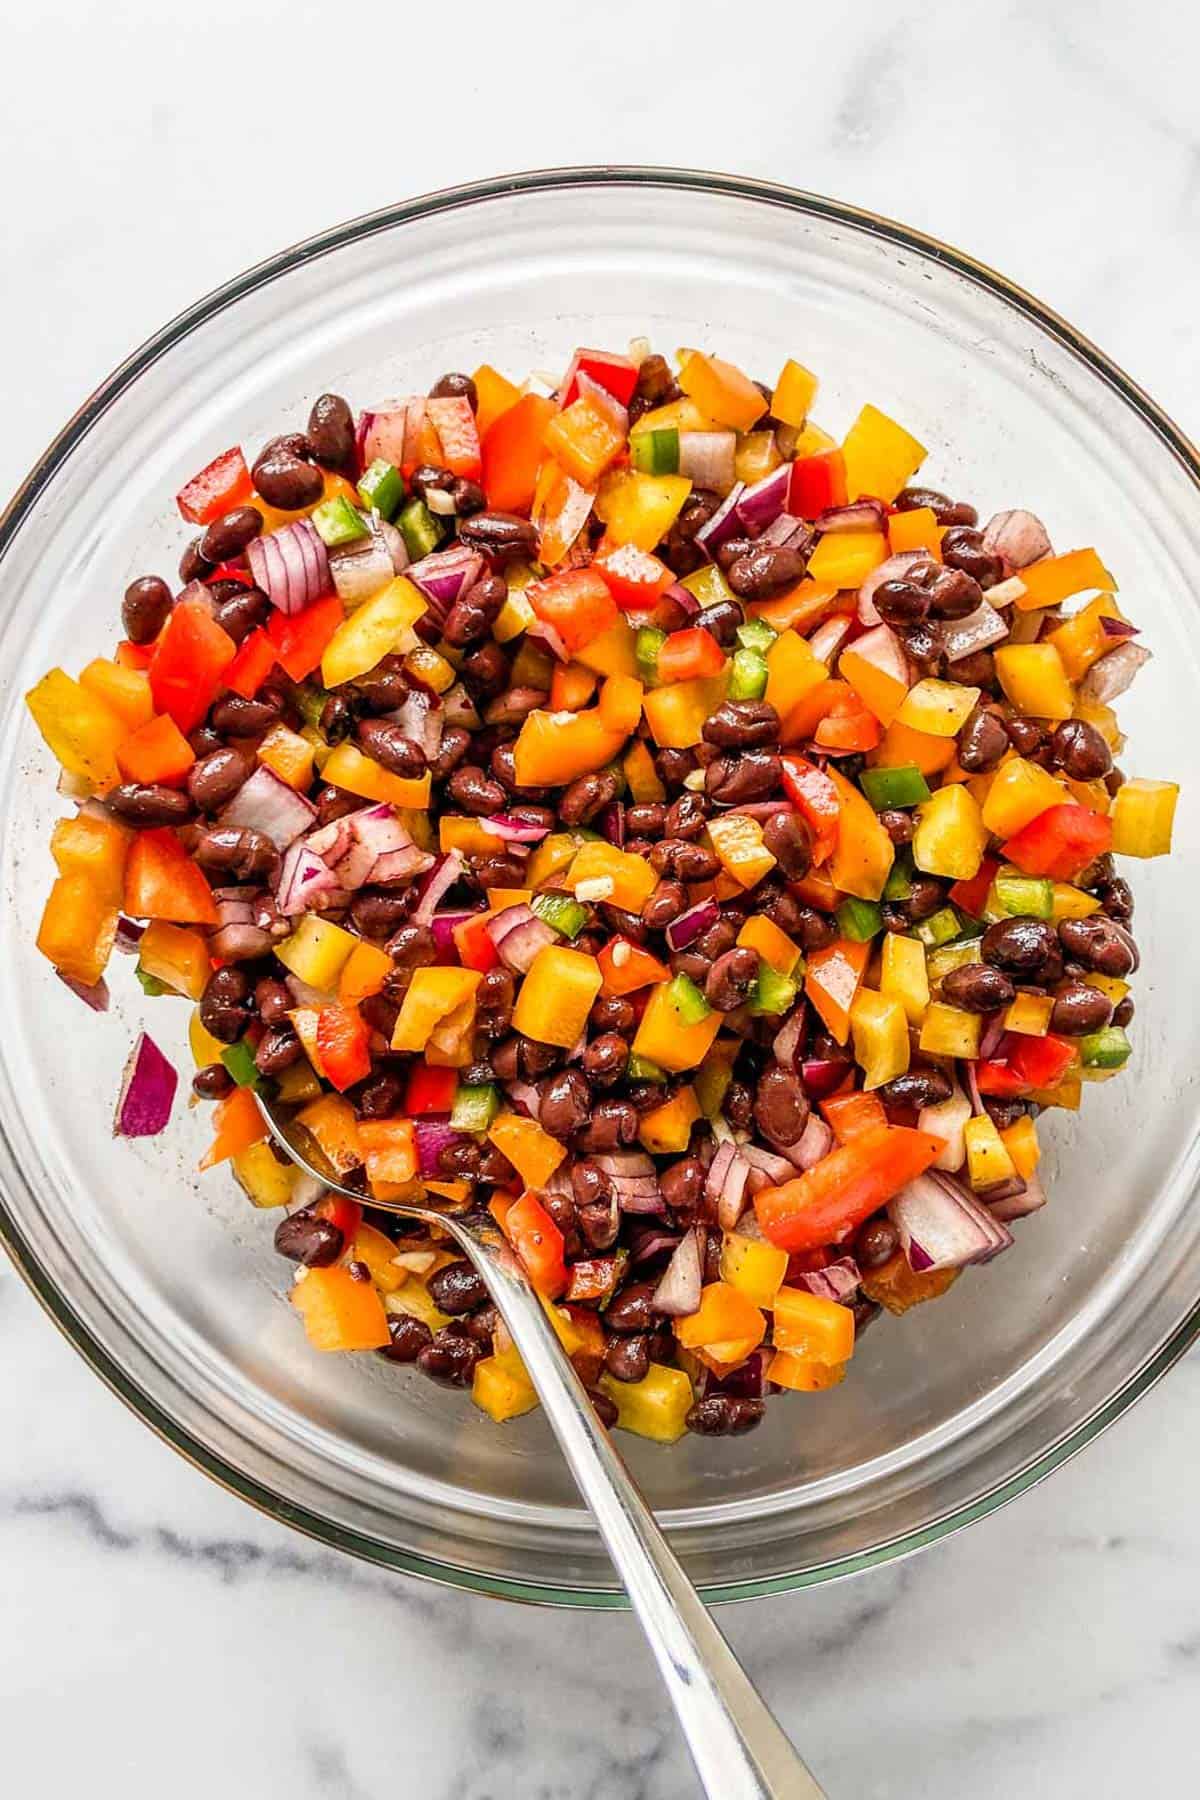 A black bean salad with bell peppers in a glass bowl.